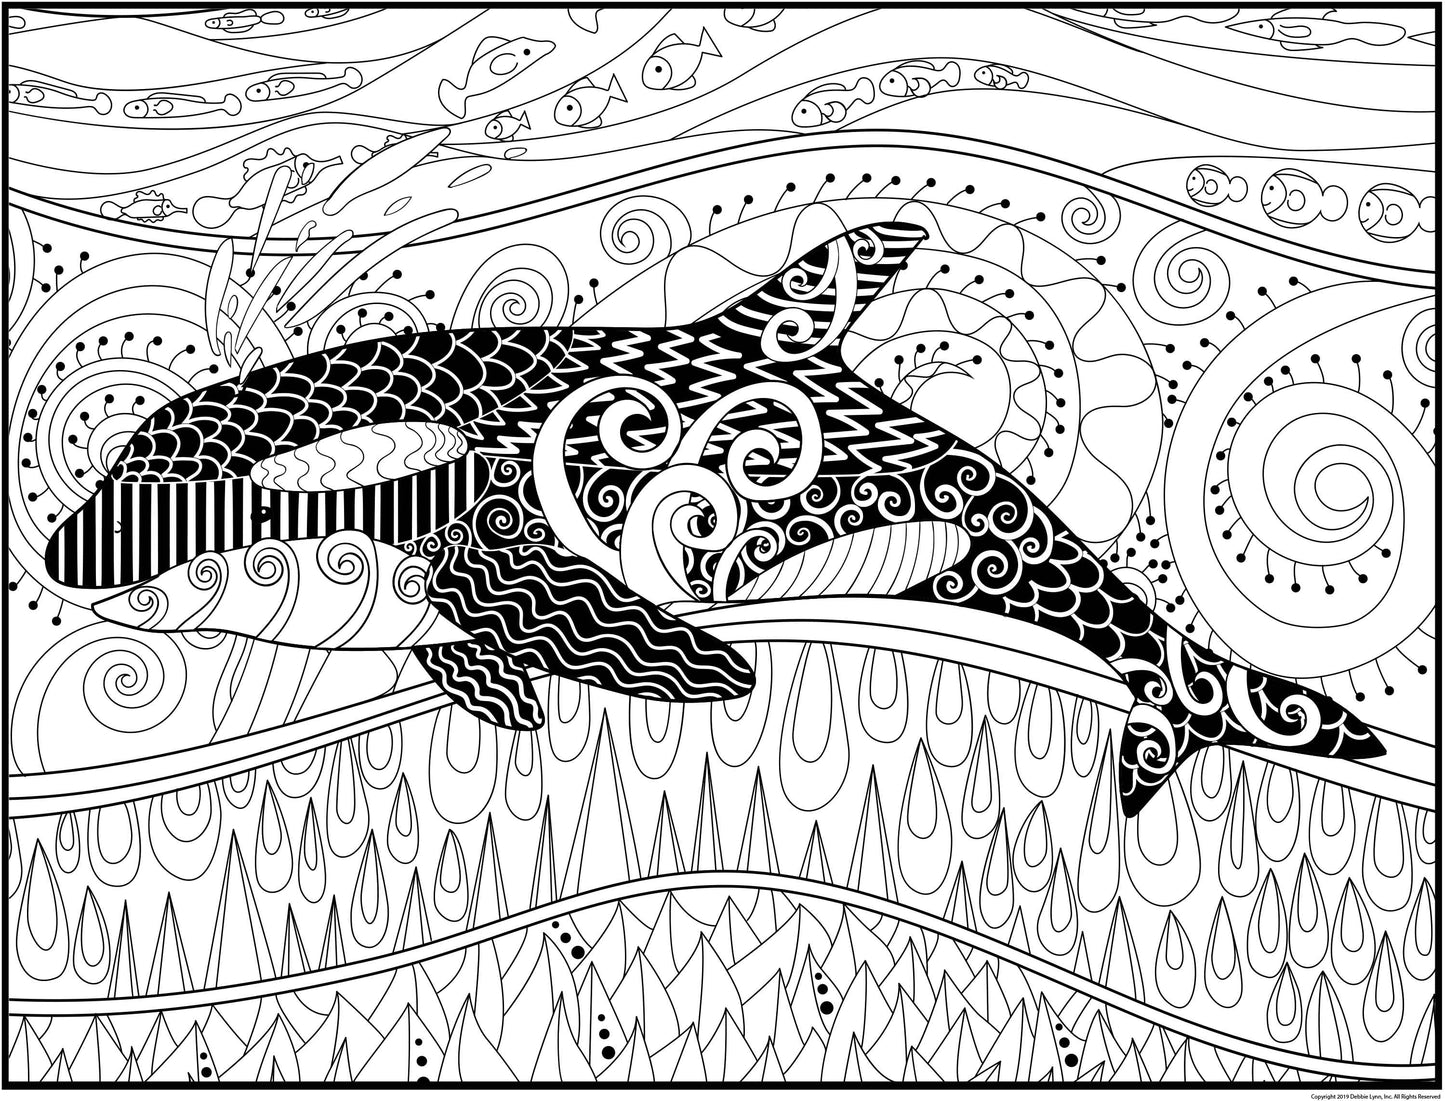 Orca Personalized Giant Coloring Poster 46"x60"